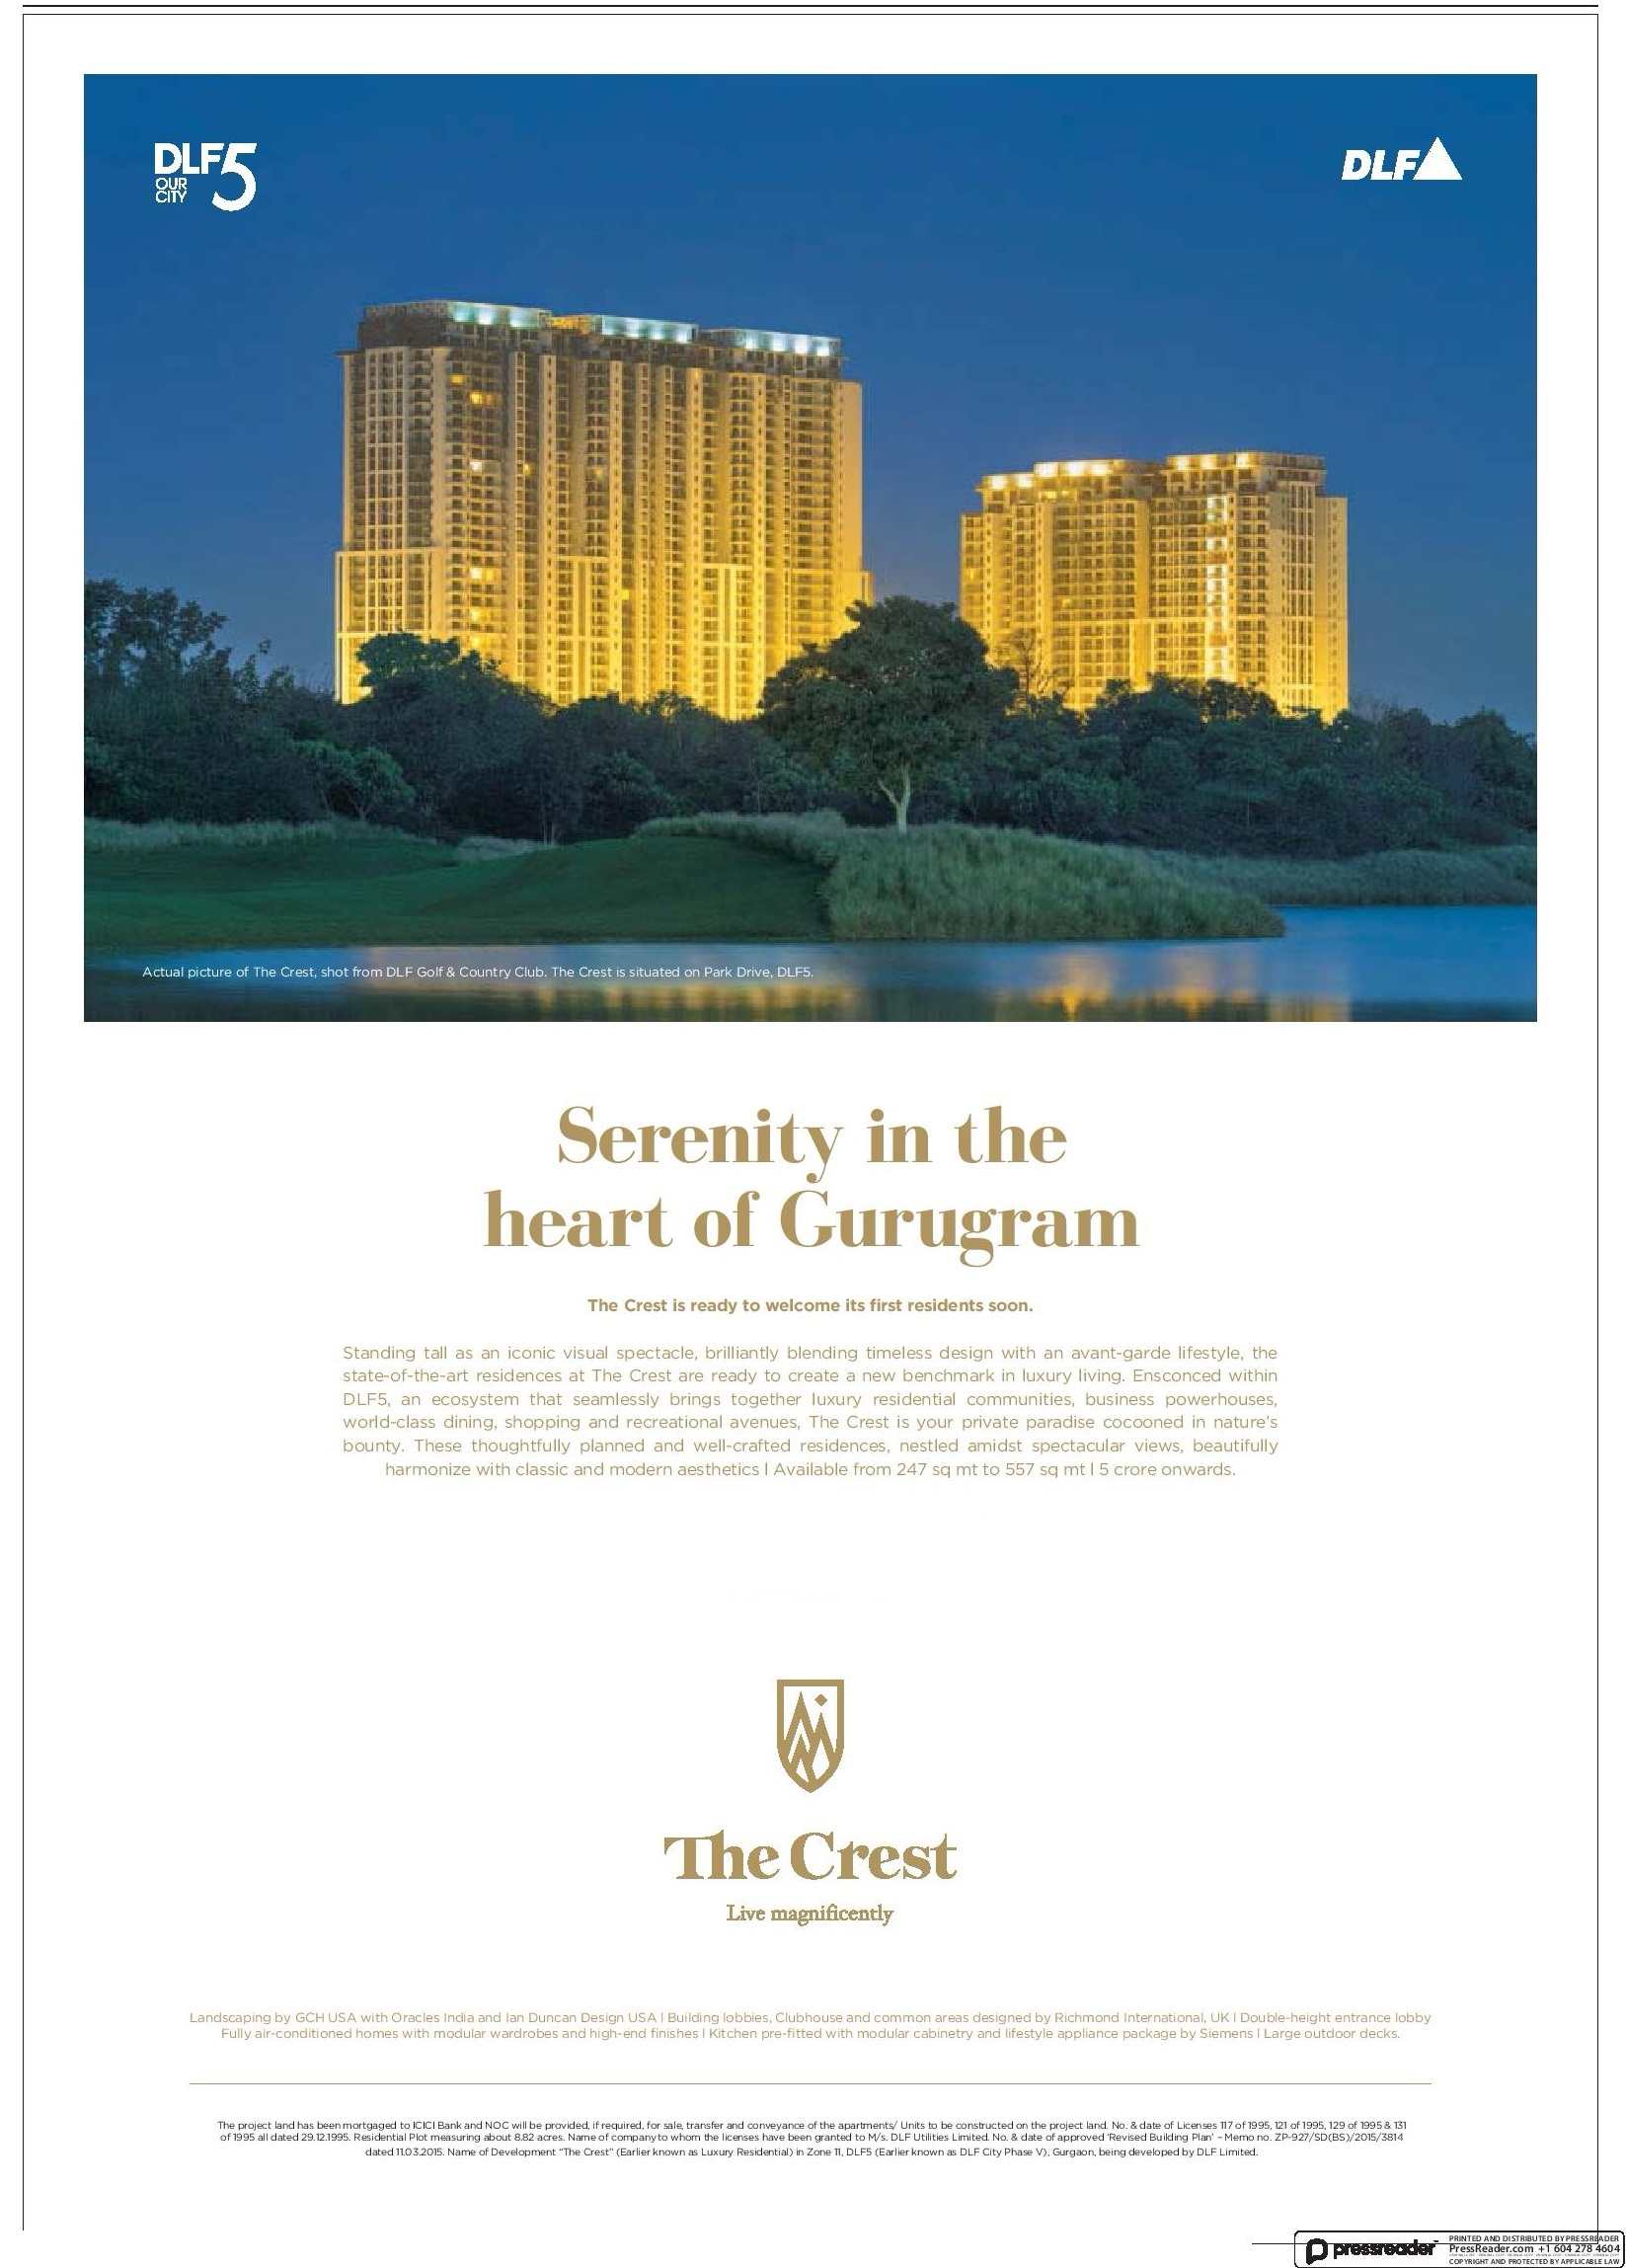 DLF The Crest is ready to welcome its first residents soon in Gurgaon Update